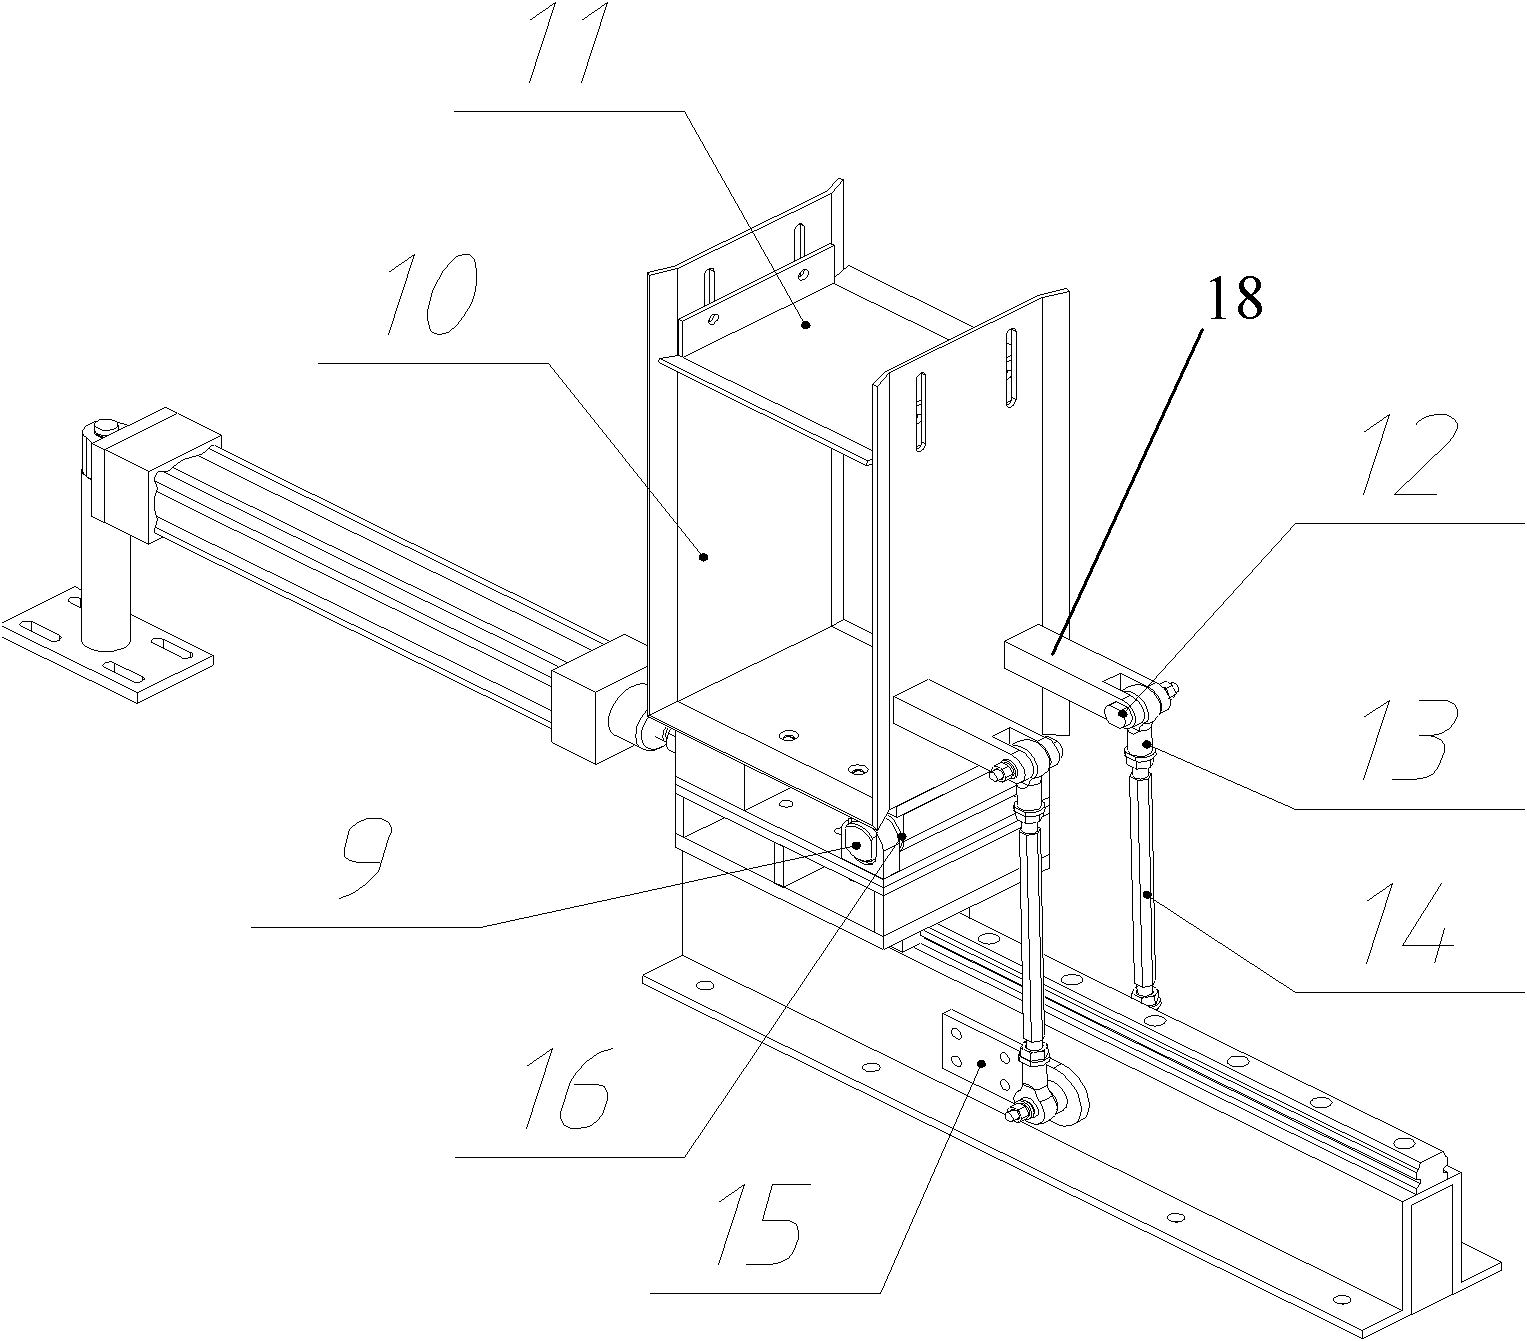 Transferring and turning device